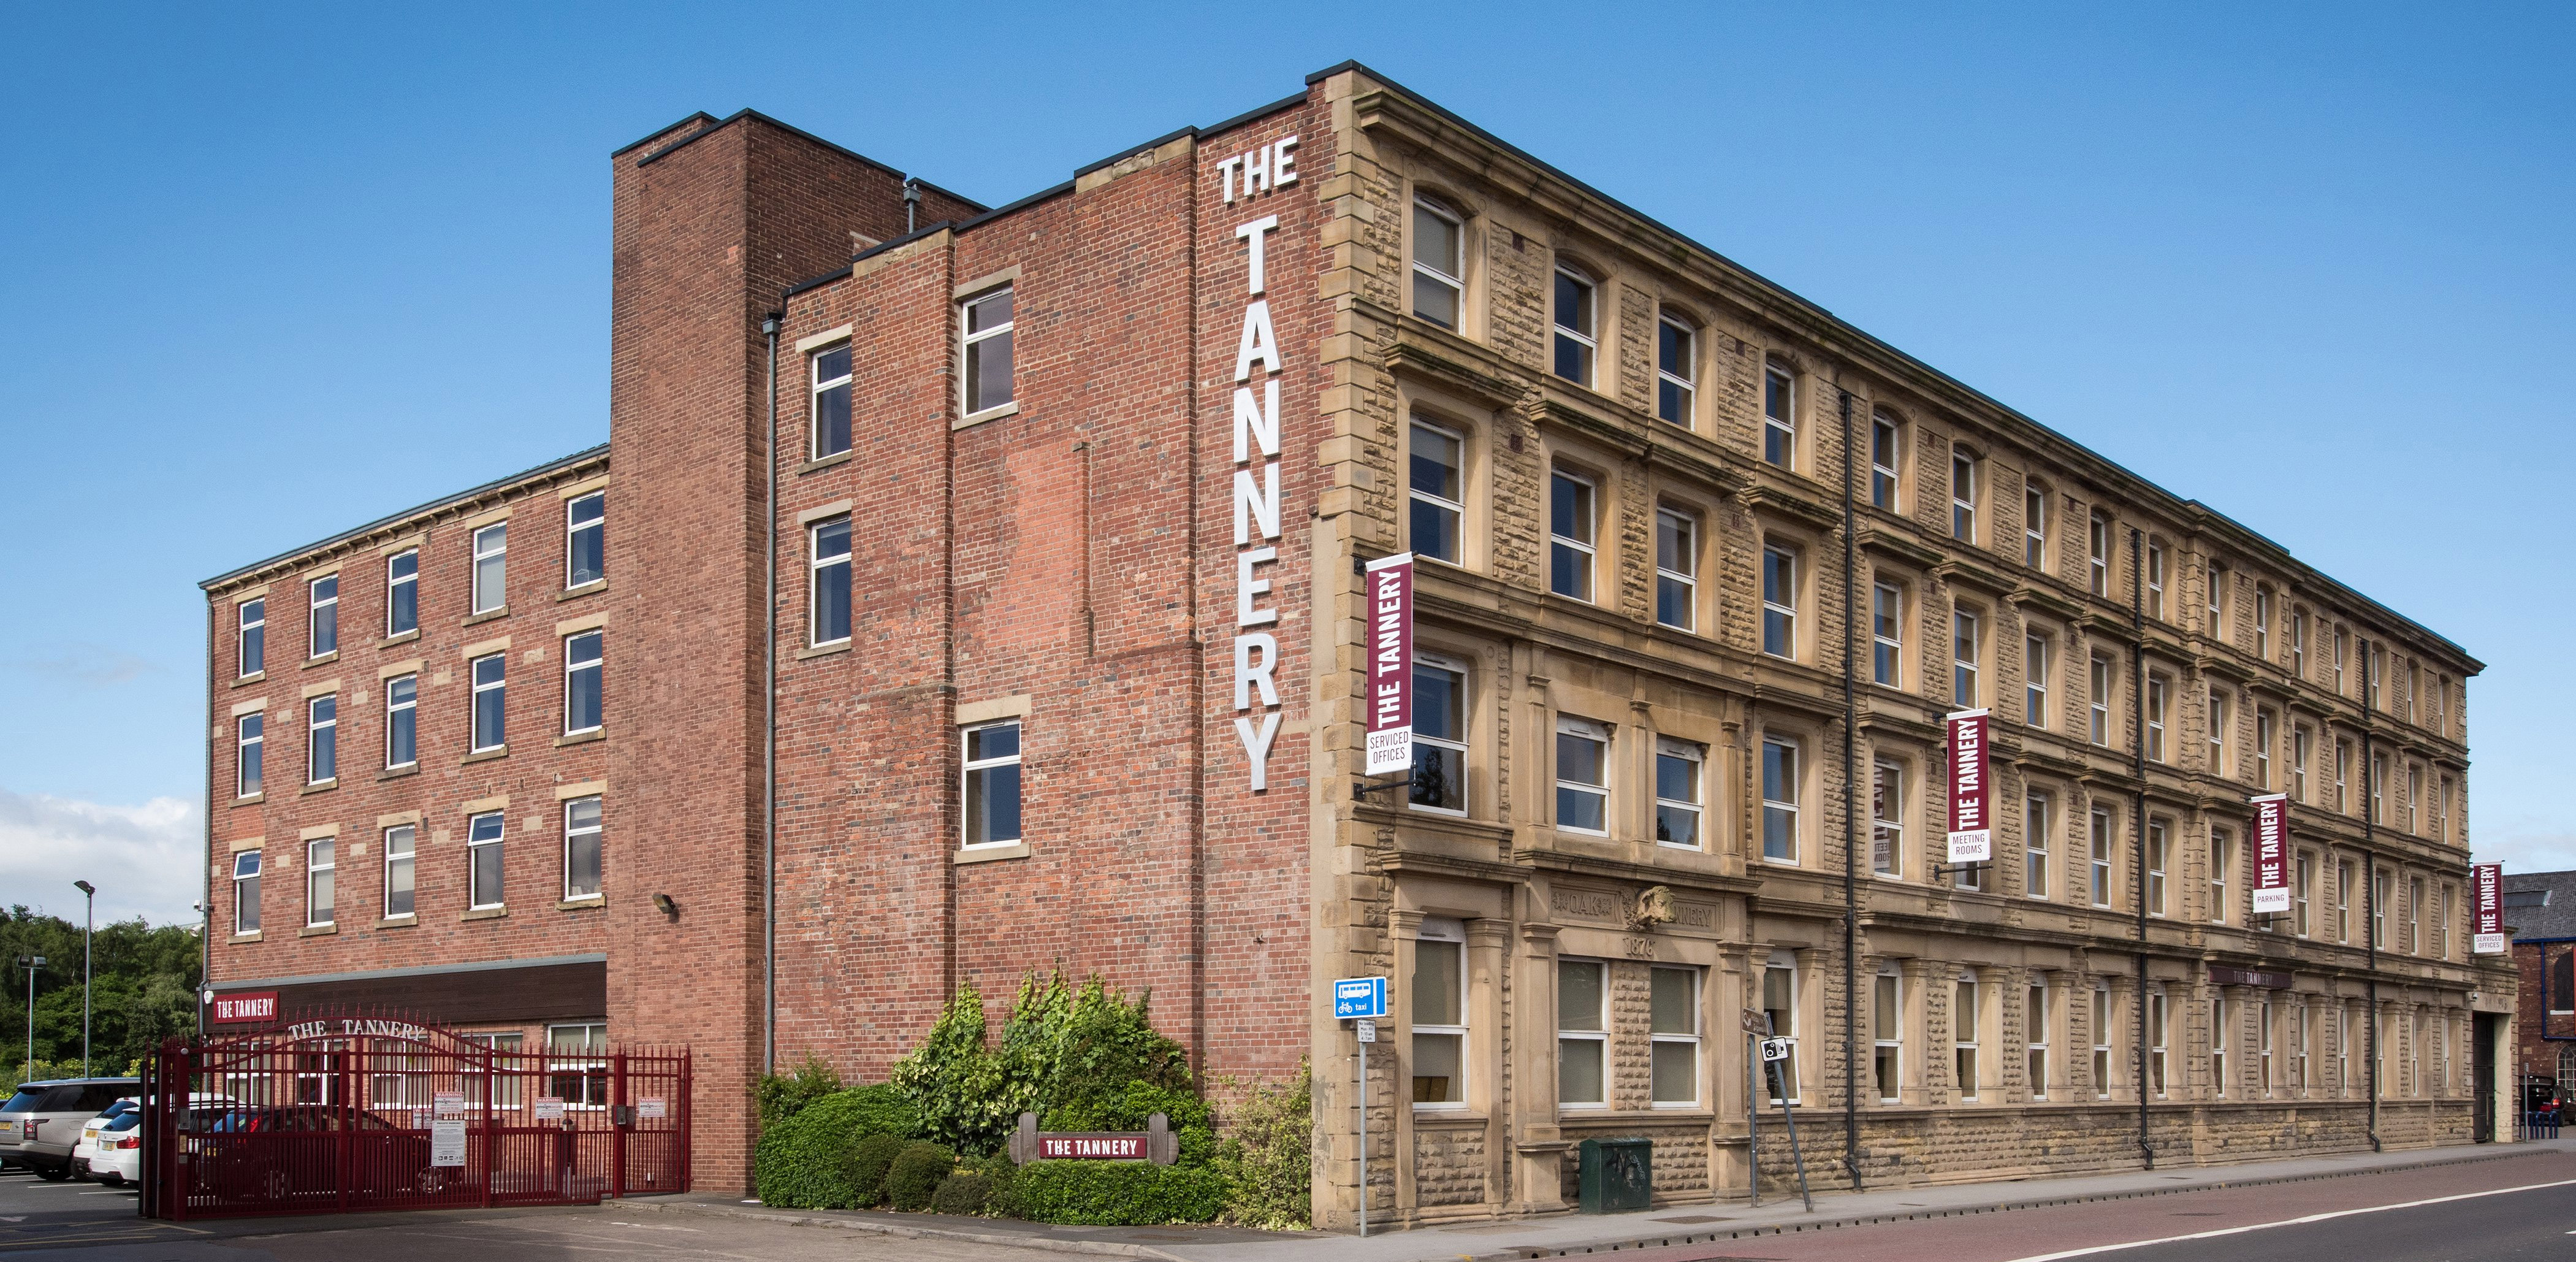 Image of The Tannery Building on Kirkstall Road, Leeds